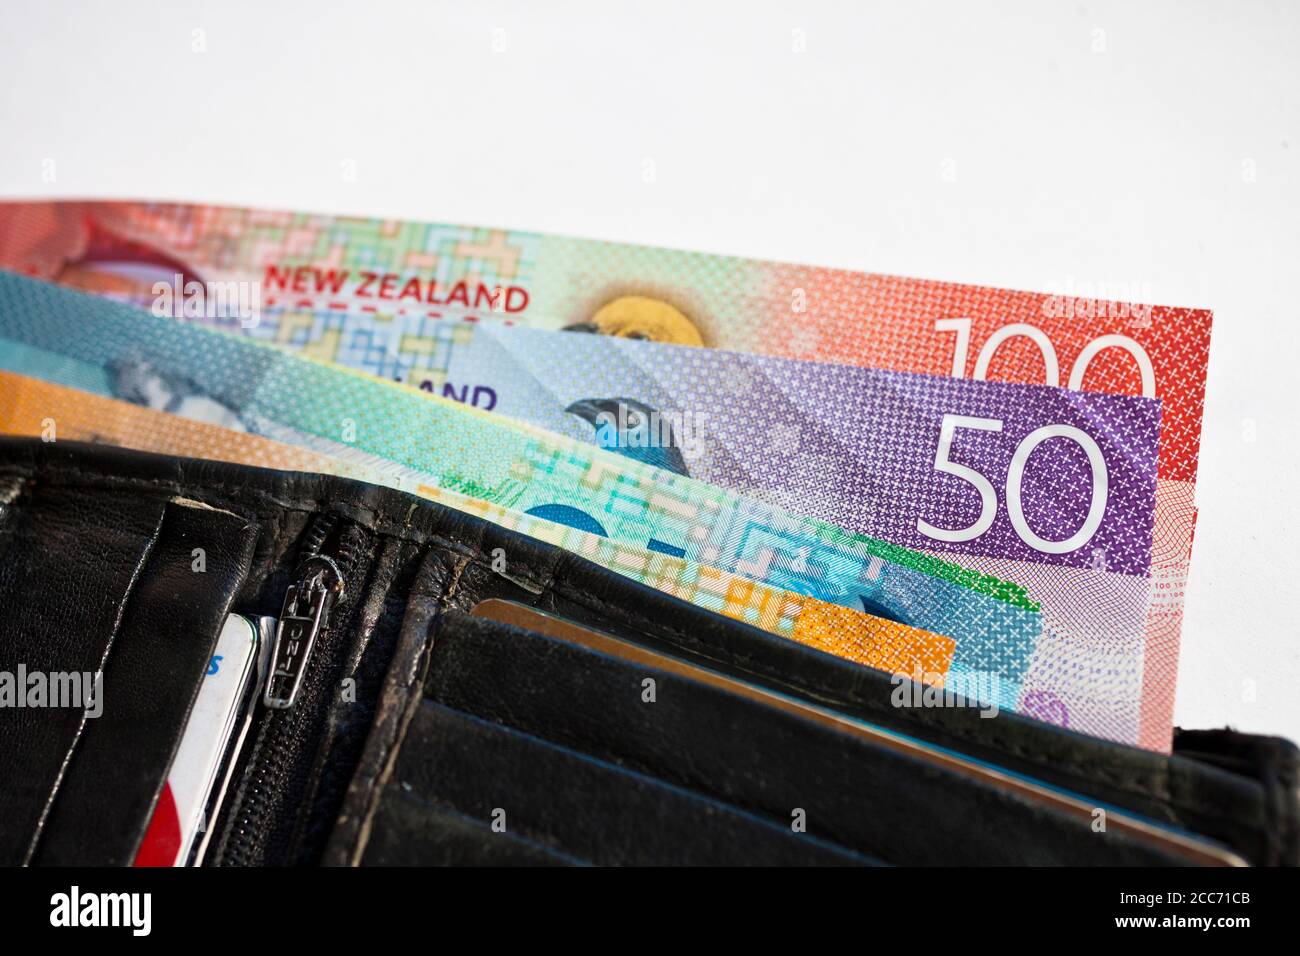 New Zealand cash, money or currency fanned out in someones wallet Stock Photo